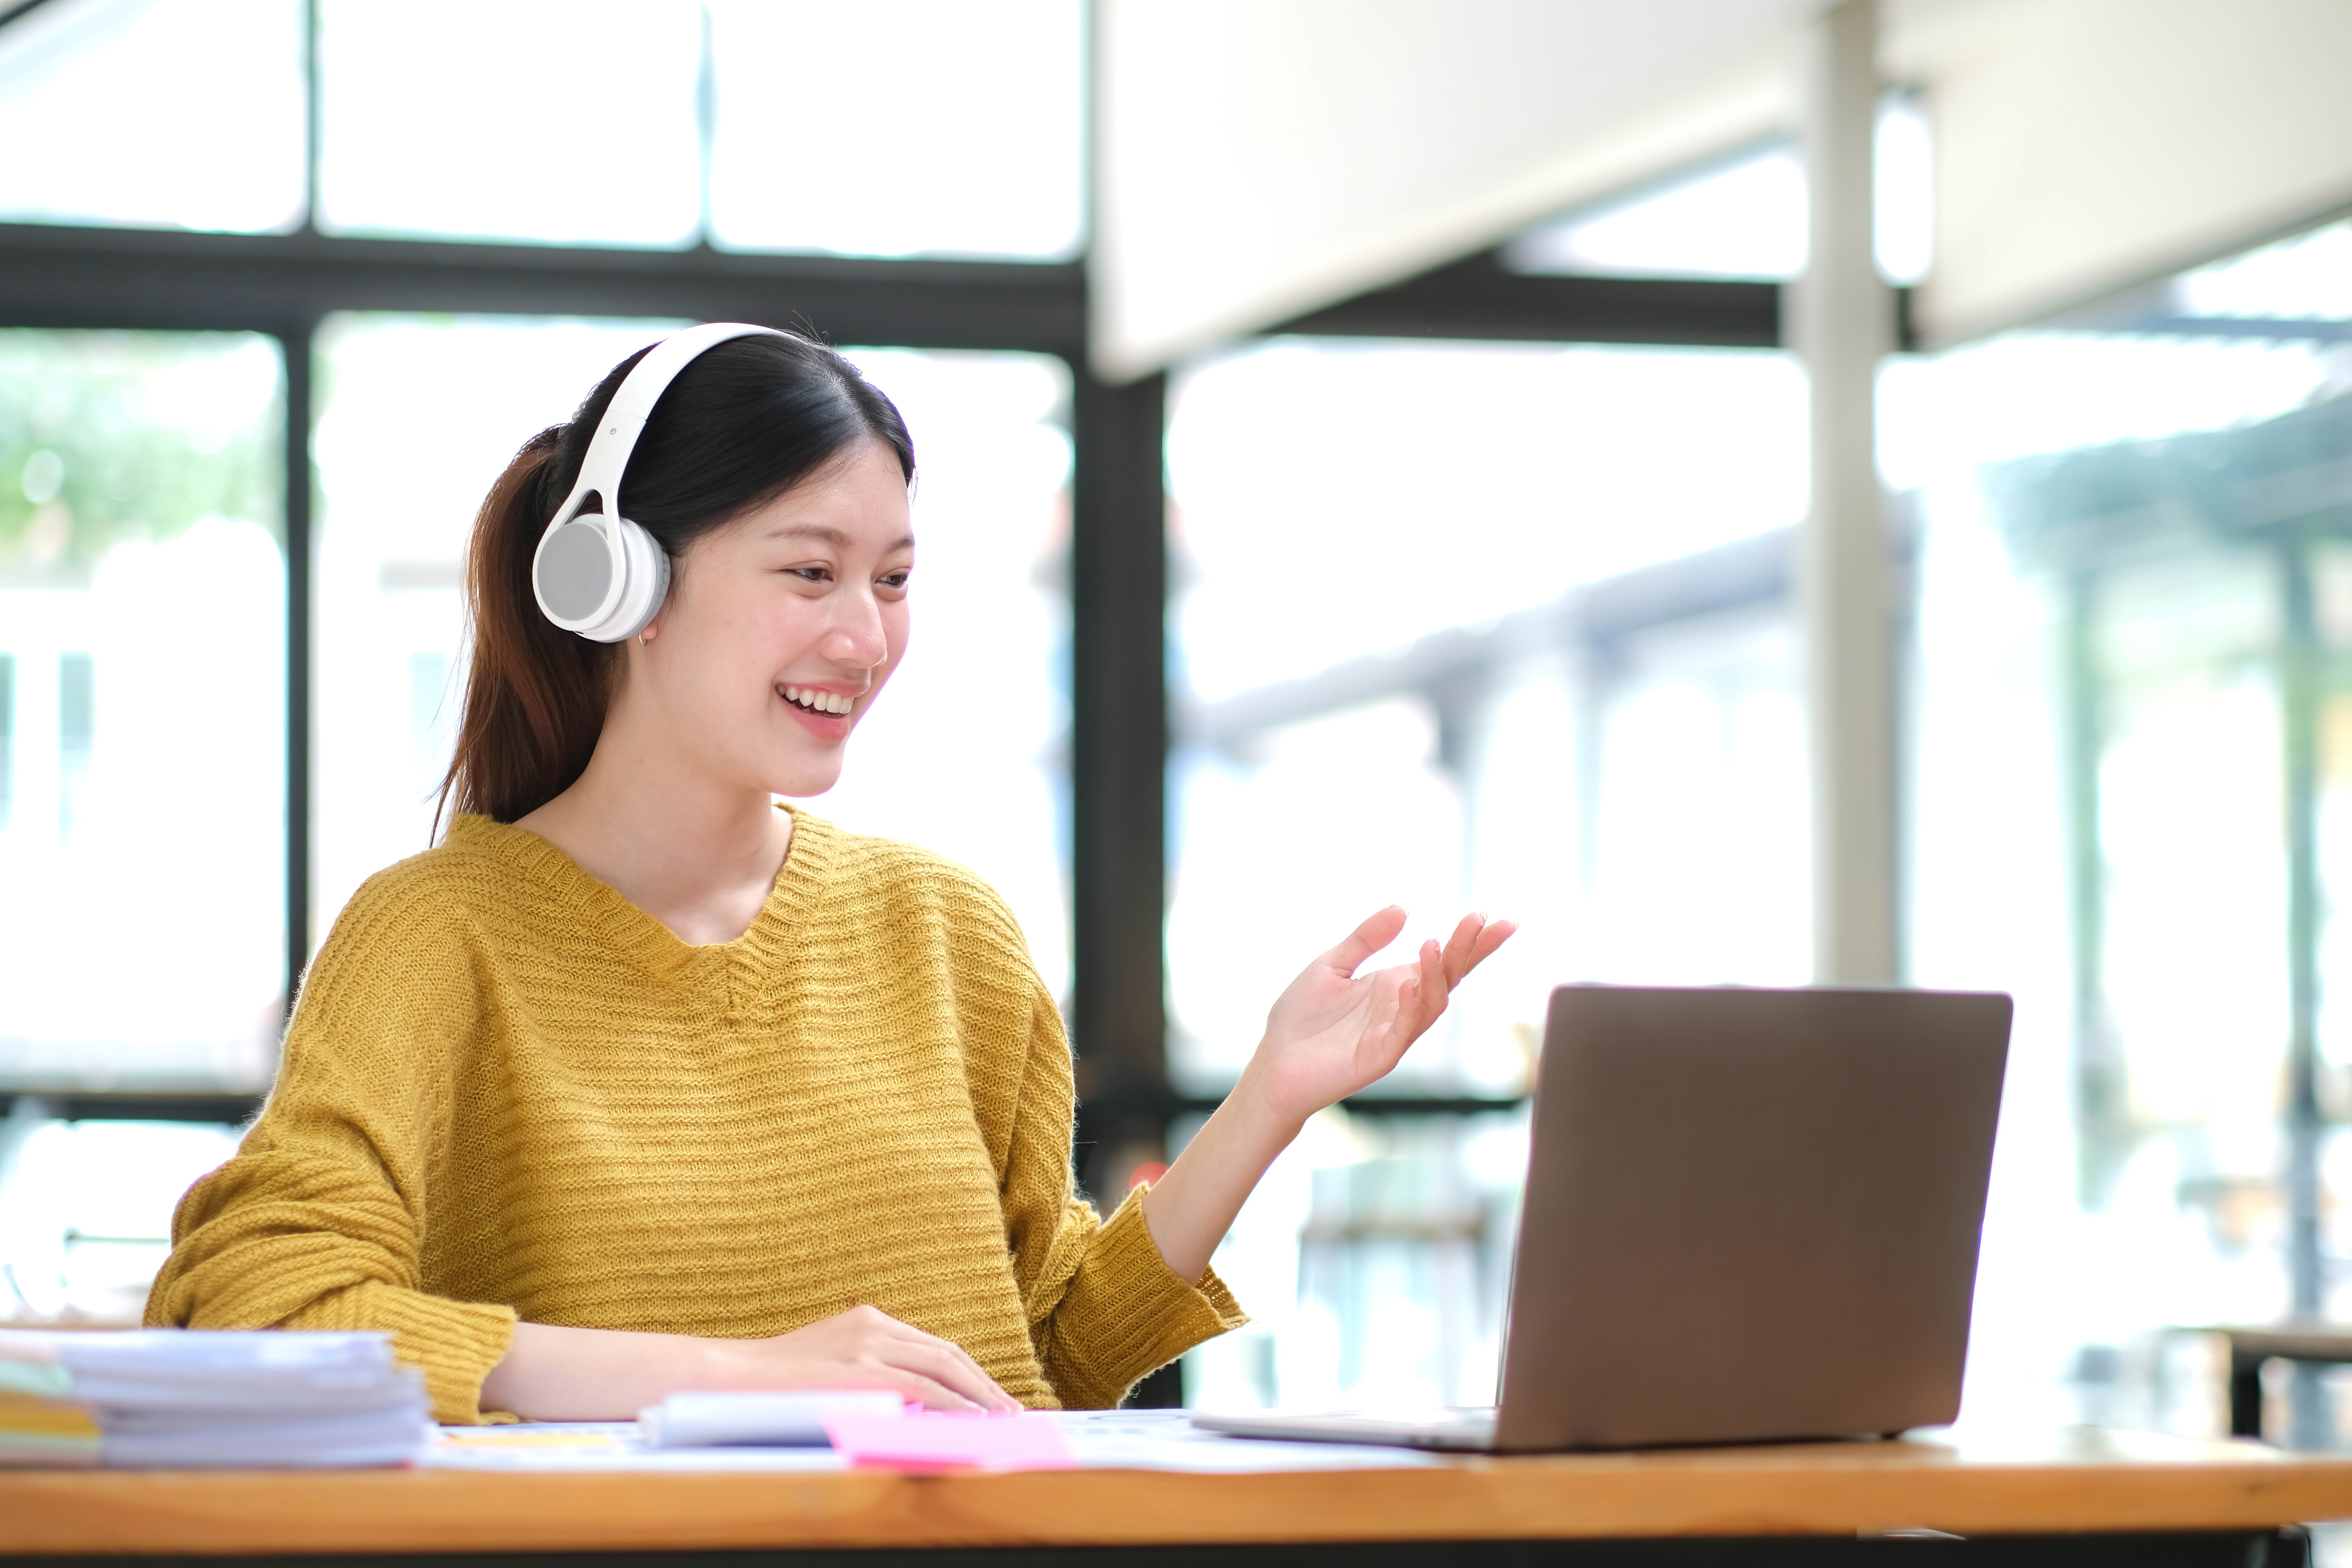 Asian woman with headphones interacting with laptop online learning